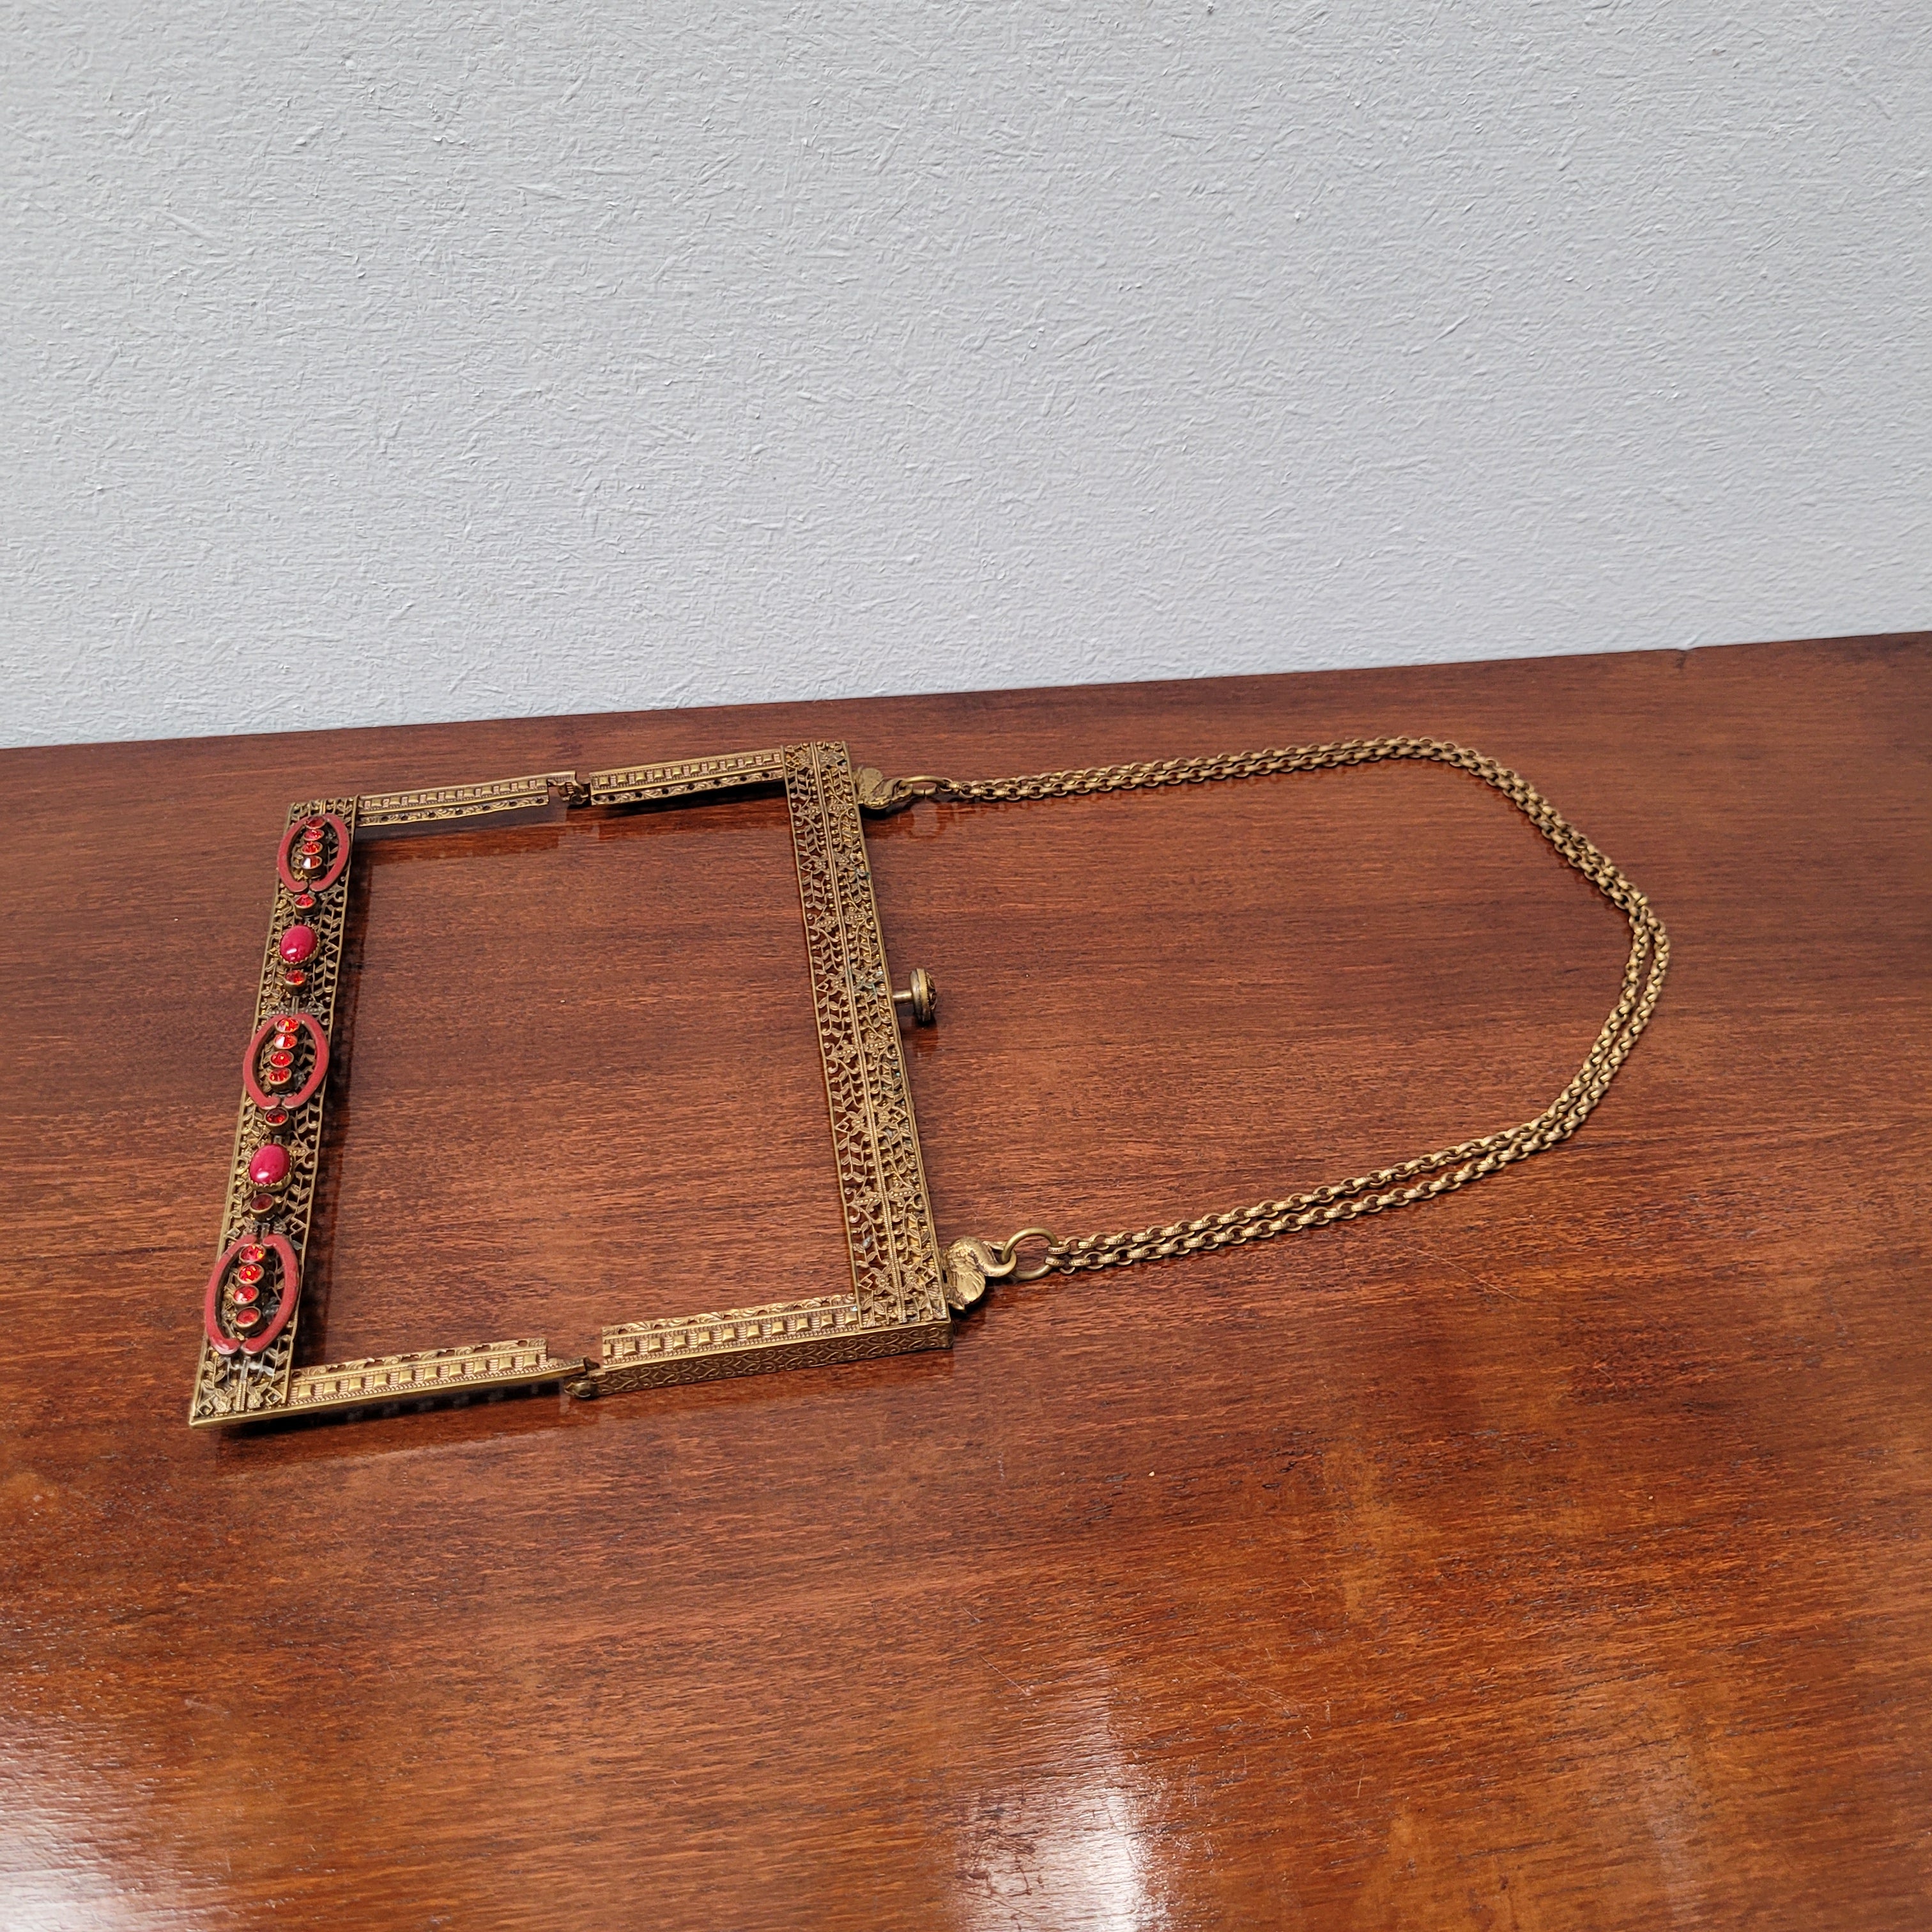 Vintage Gold Purse Frame, 6.5 Inch Purse Frame With Sew Holes, 1920's  Medium Sized Gold Colored Purse Frame - Etsy